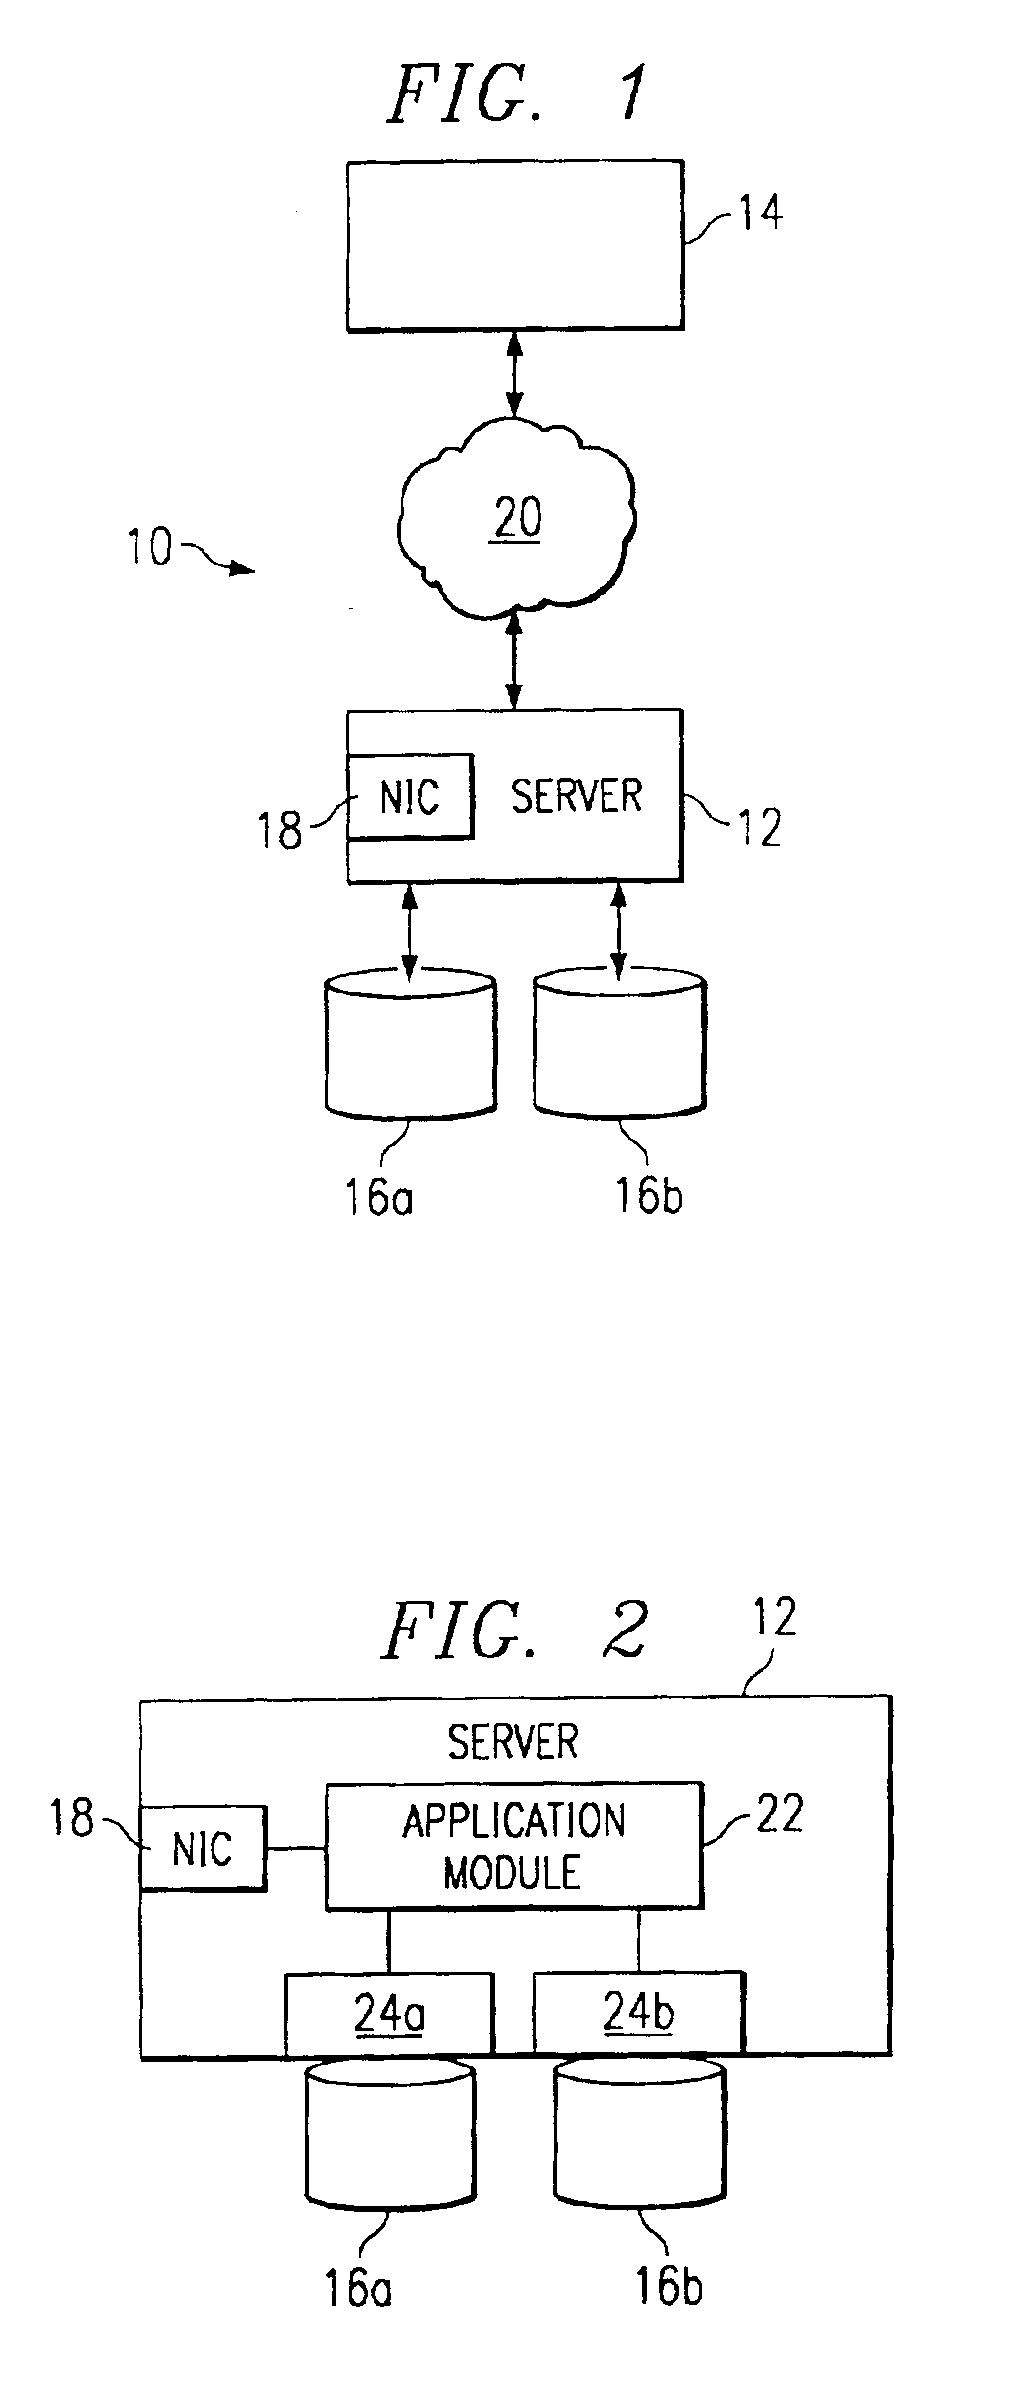 System and method for generating world wide names